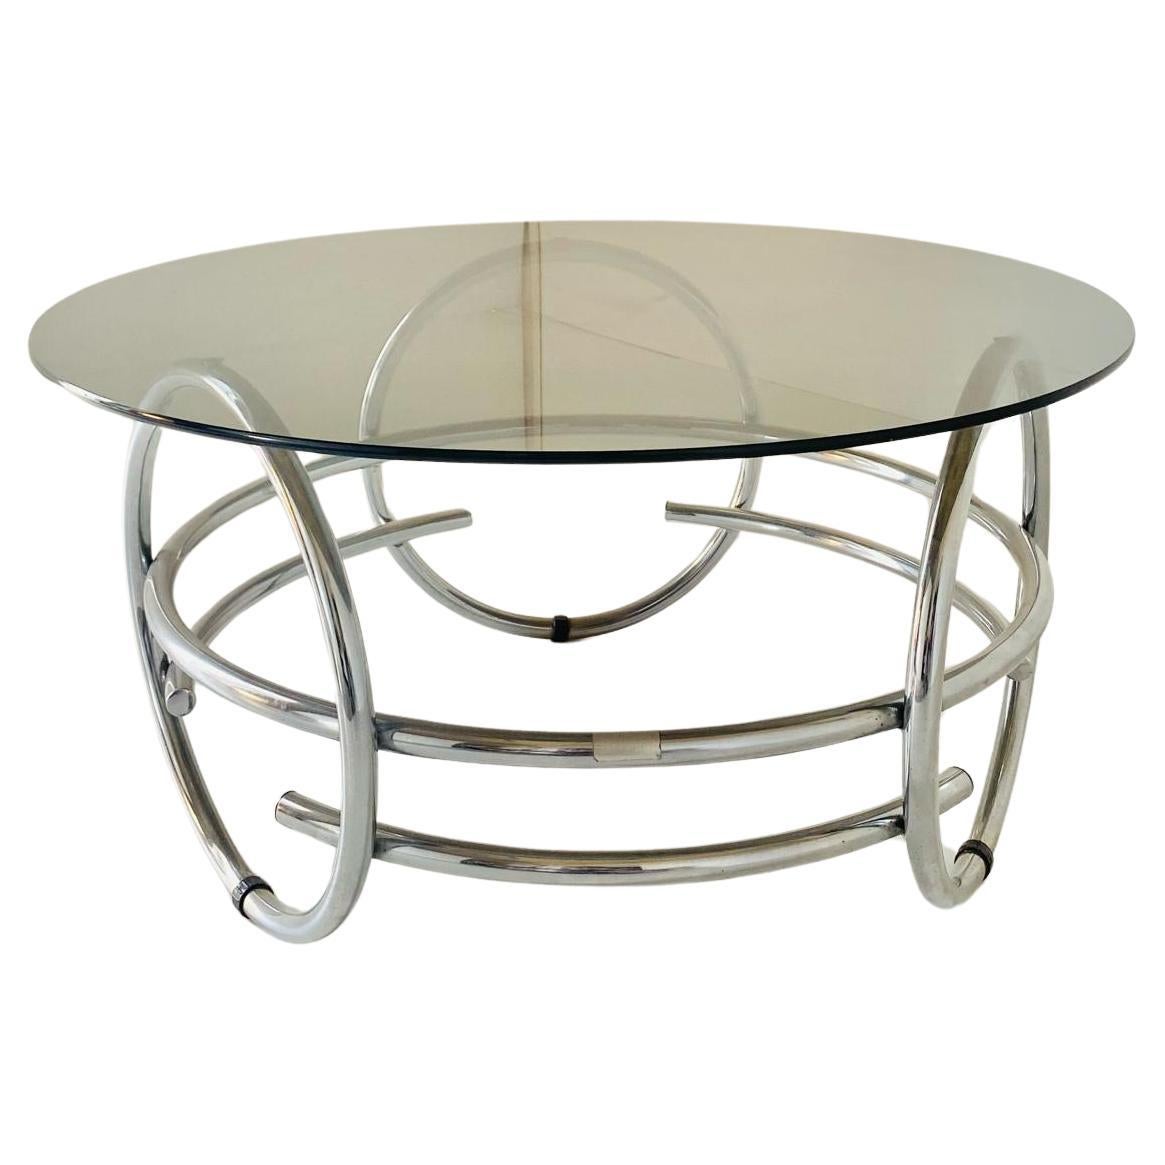 Vintage chromed coffee table with smoked glass top.
Pure space age style made in Italy from the 1970s. 
Mid-century round coffee table with chrome frame and smoked black top. Very sturdy structure.
The object represents the typical space age made in